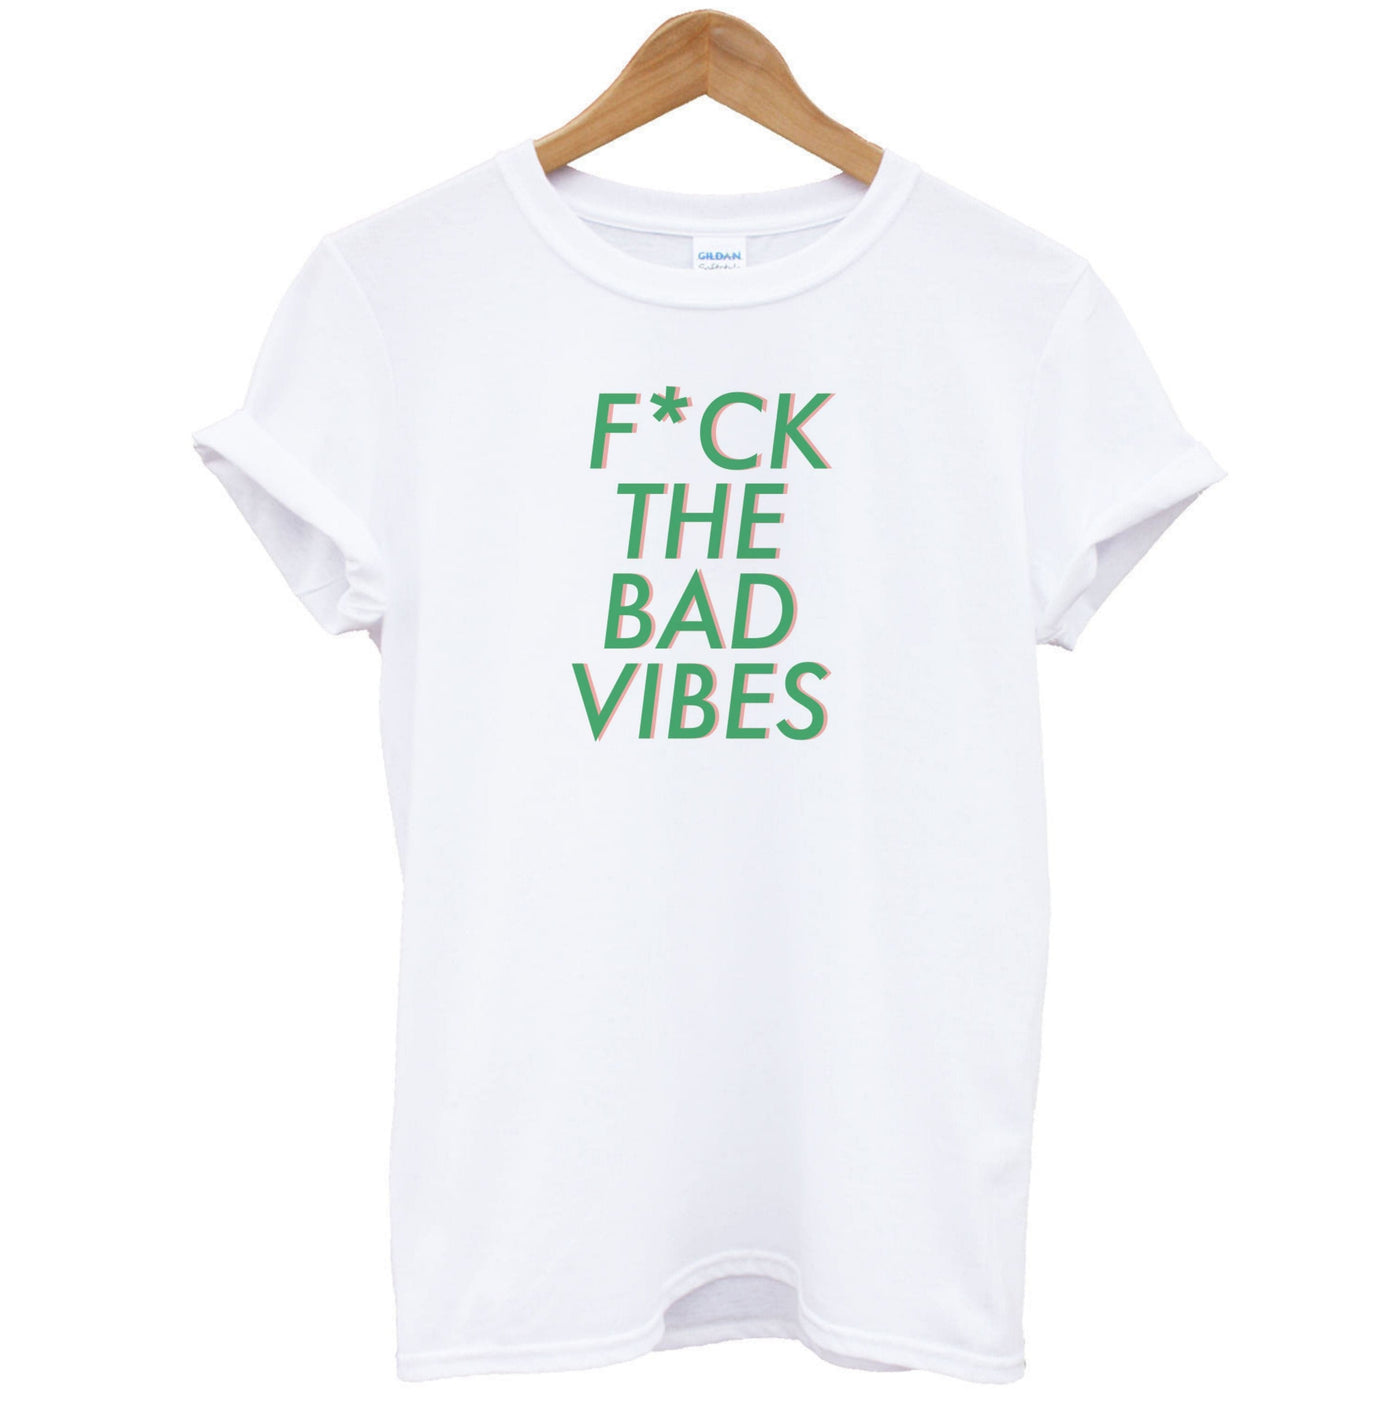 The Bad Vibes - Sassy Quotes T-Shirt